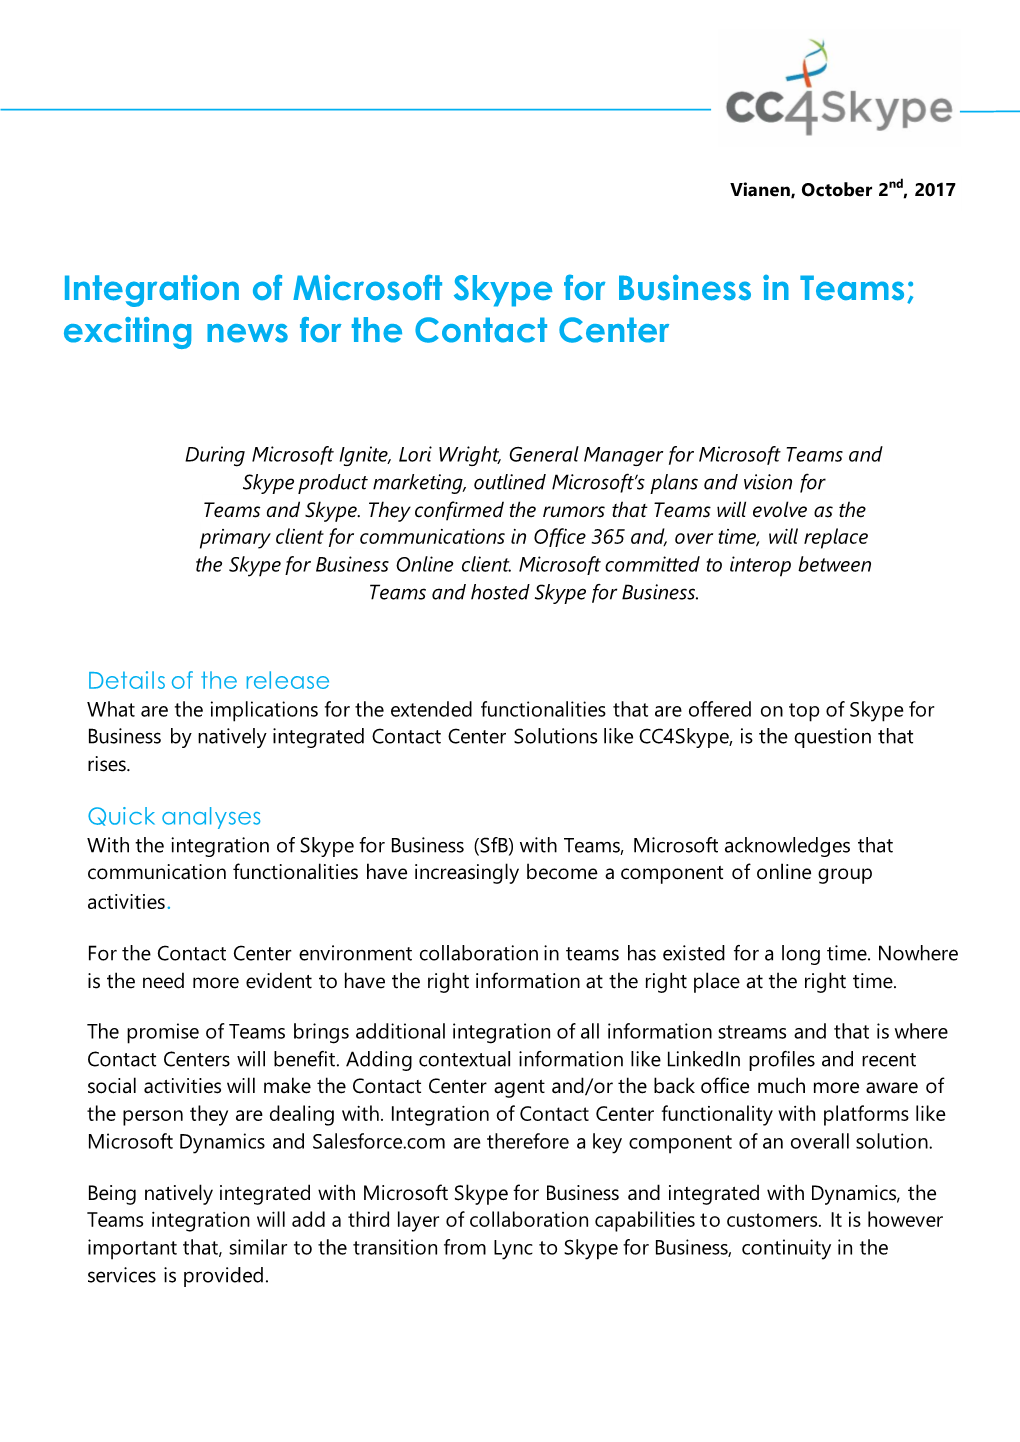 Integration of Microsoft Skype for Business in Teams; Exciting News for the Contact Center